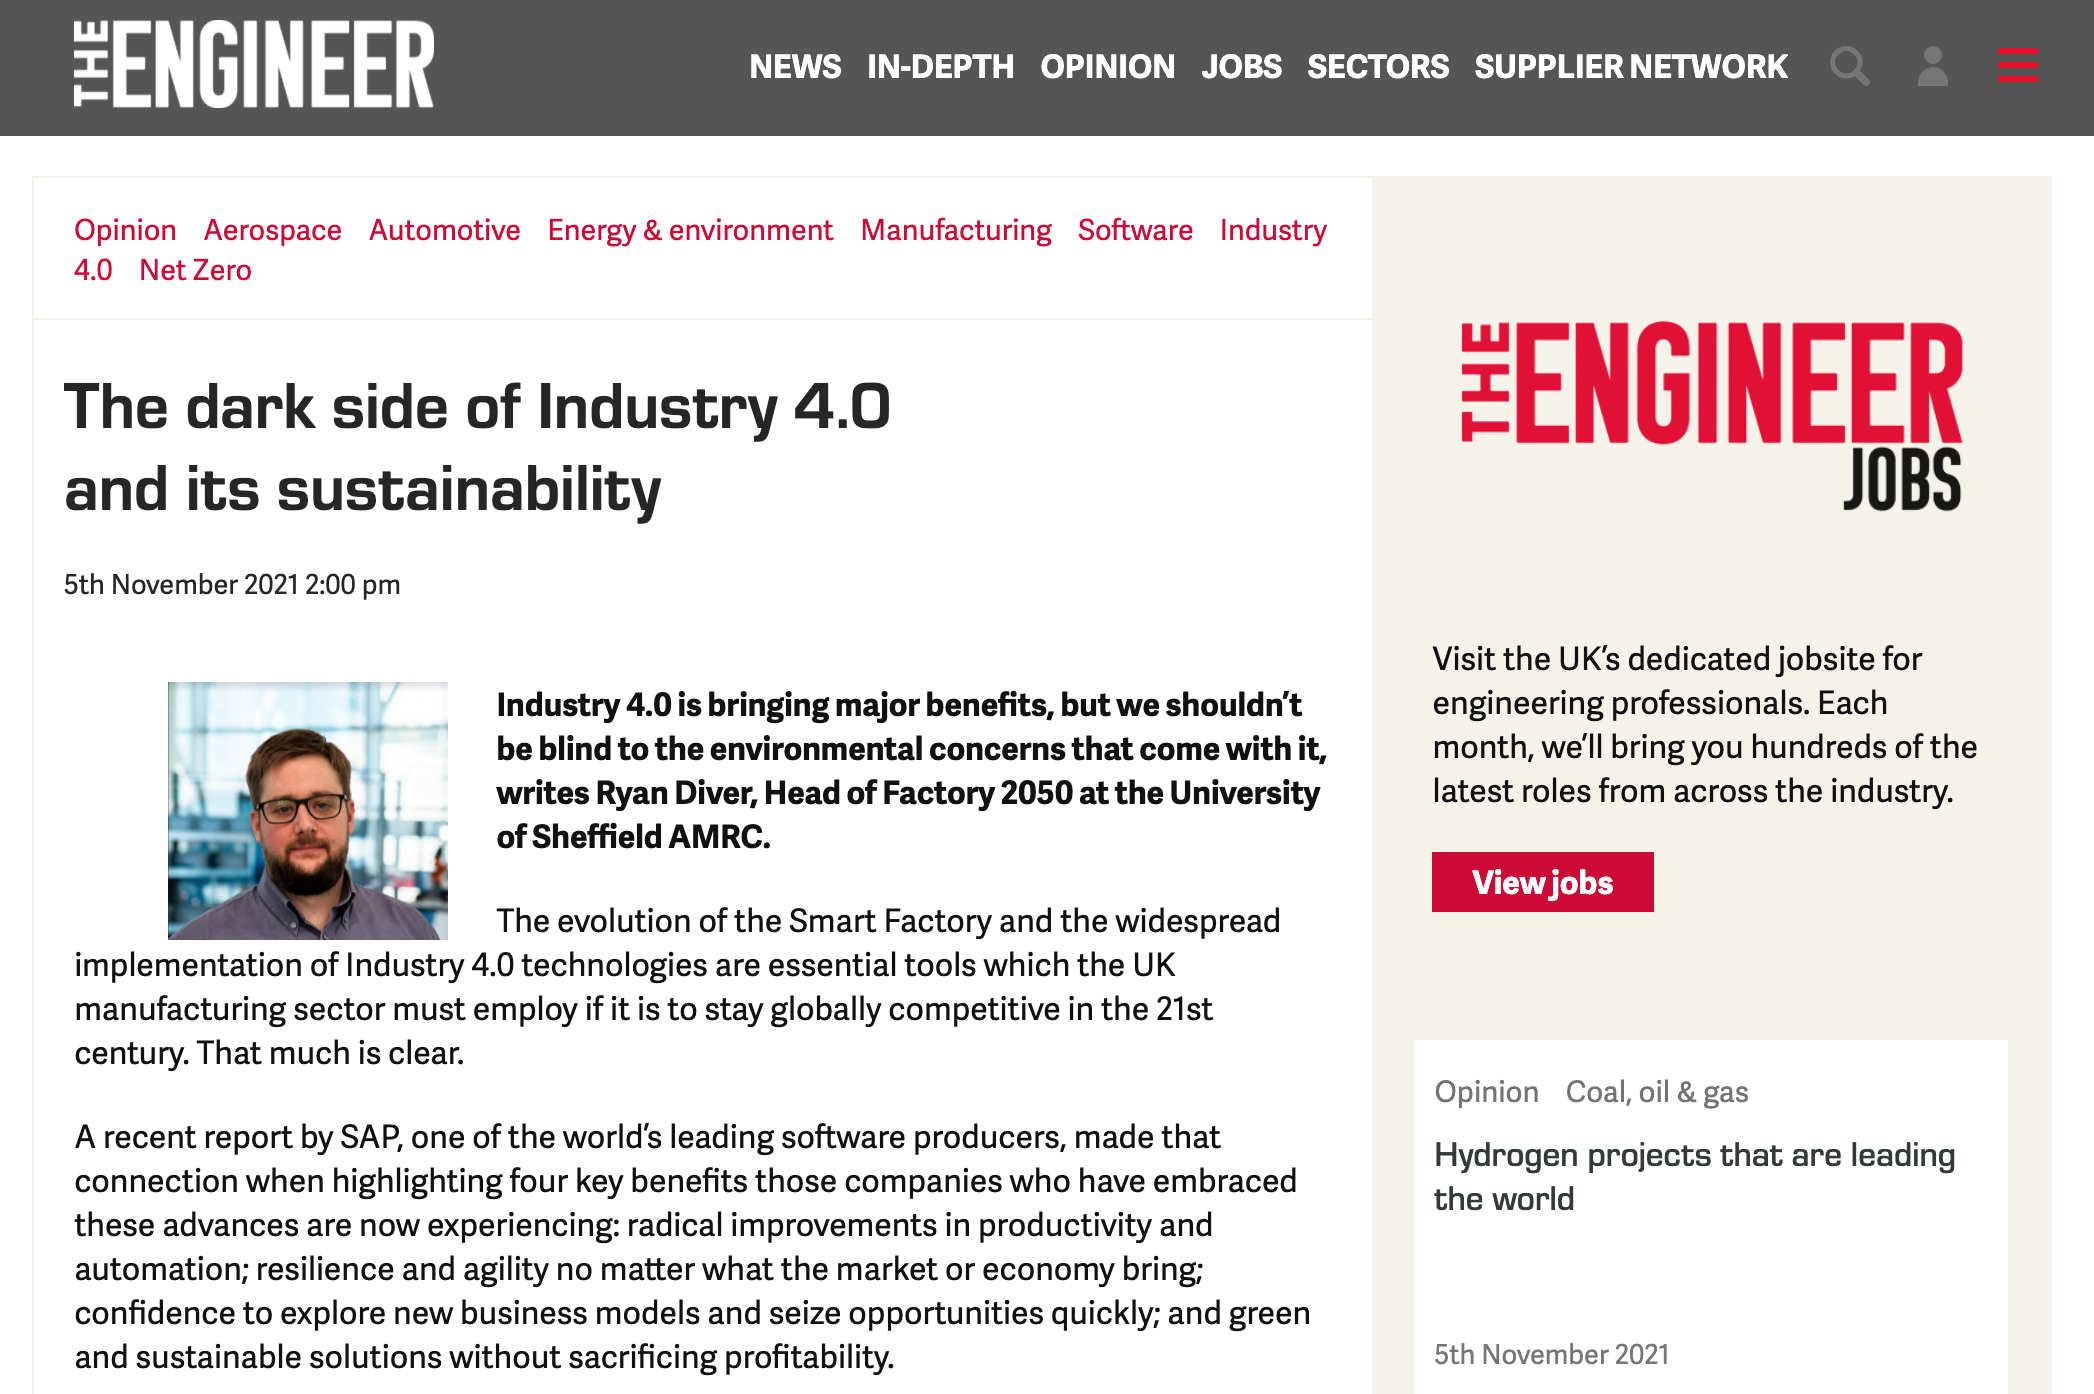 The dark side of Industry 4.0 and its sustainability